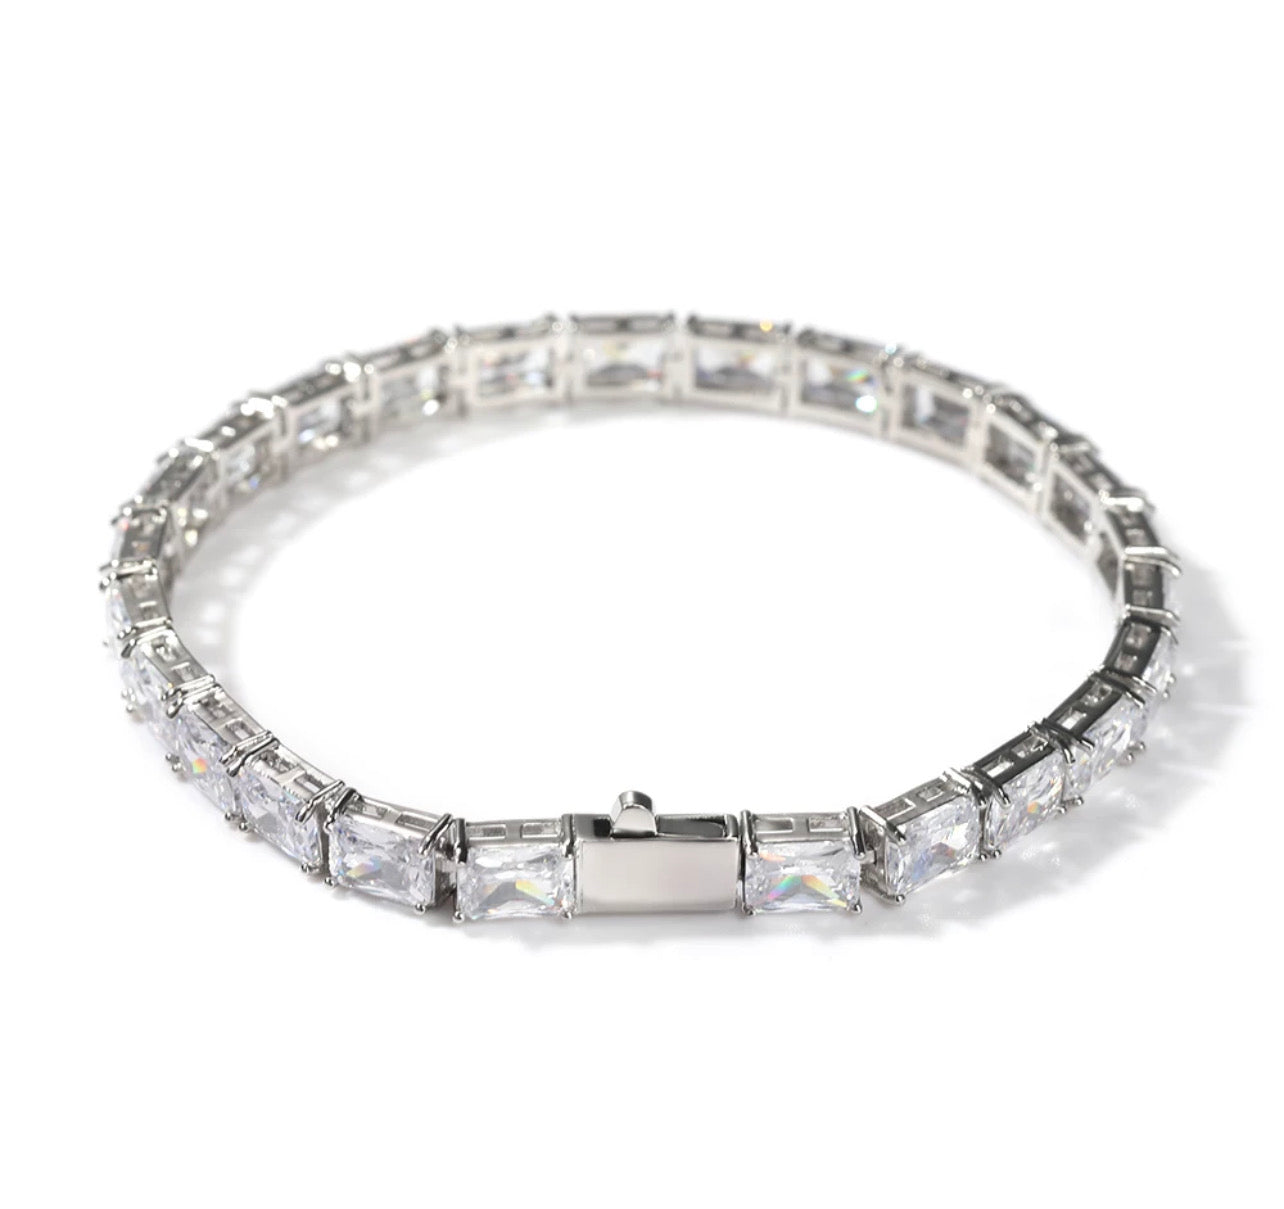 How tennis bracelets got their name | The Jewellery Editor